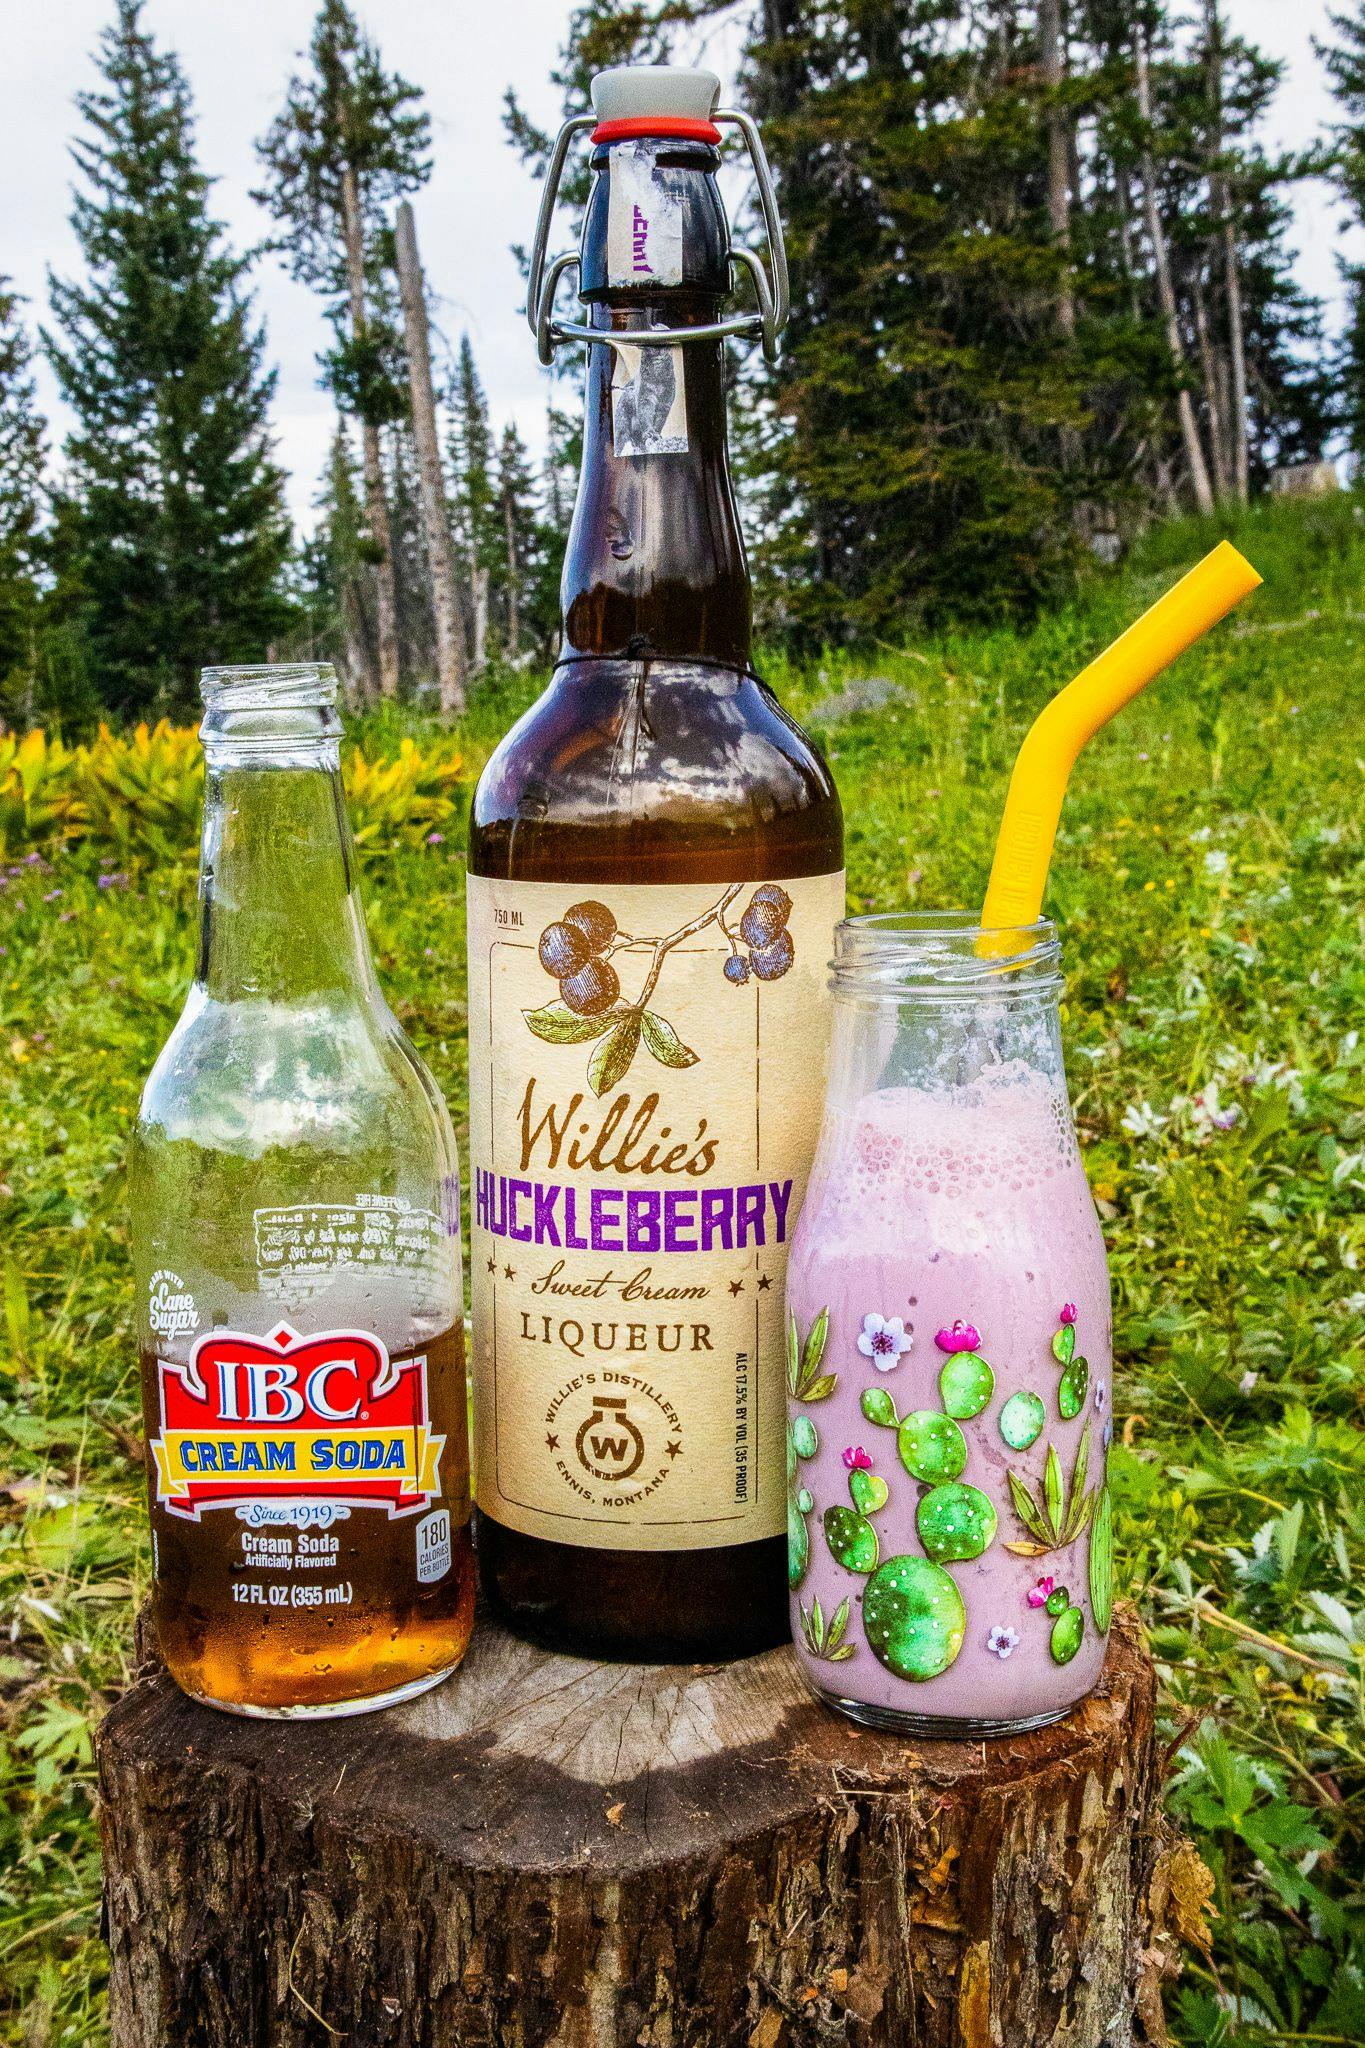 The ingredients for a huckleberry cocktail posed on a stump.